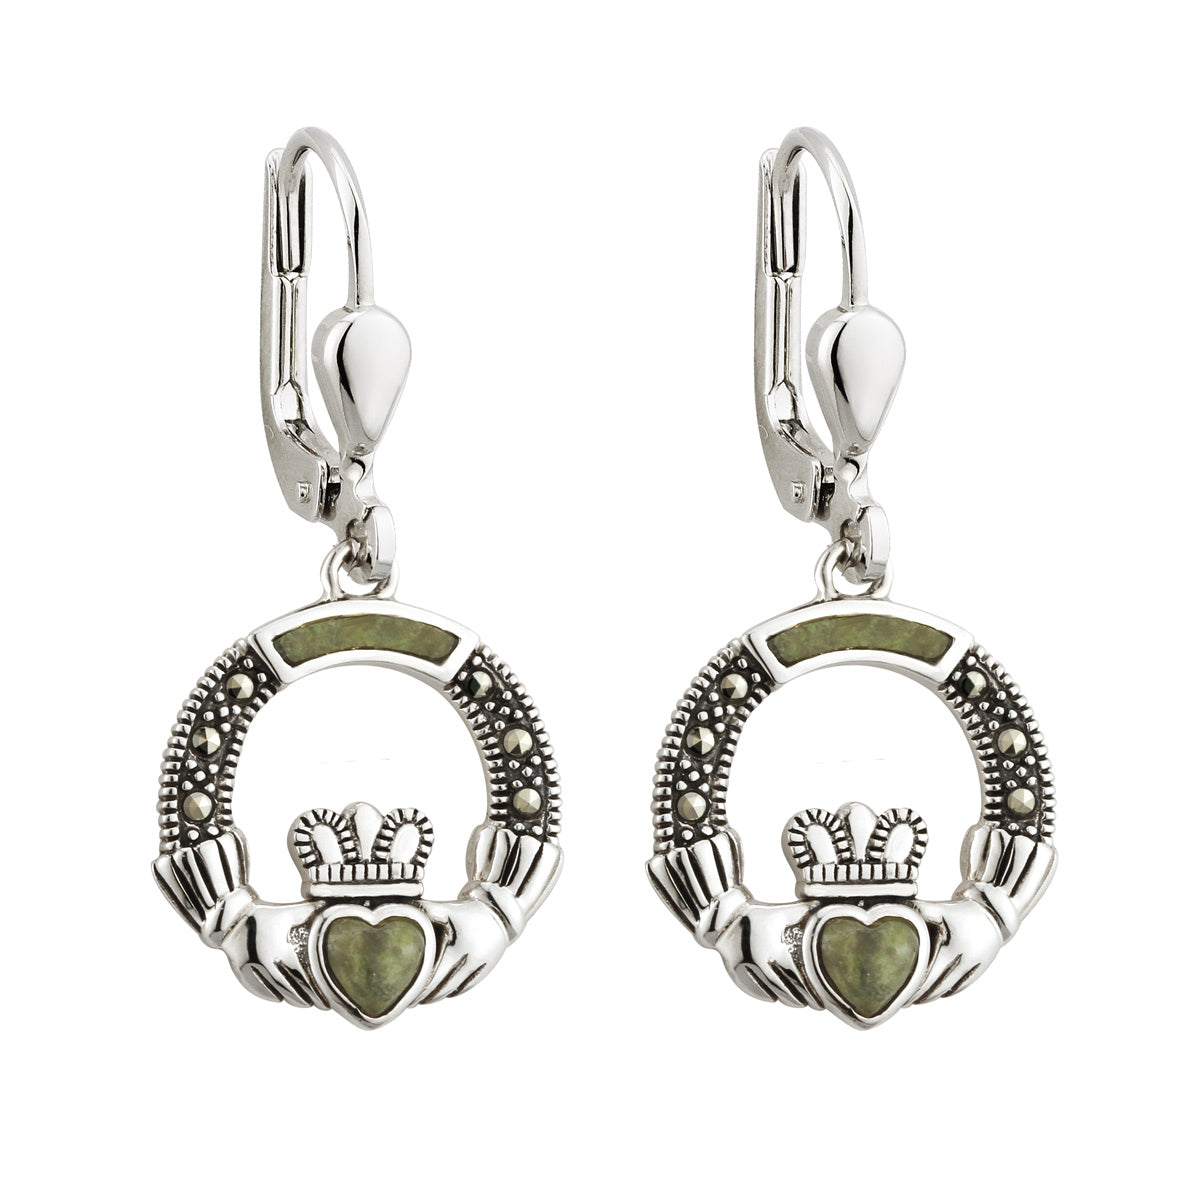 sterling silver marcasite and connemara marble claddagh drop earrings s33558 from Solvar